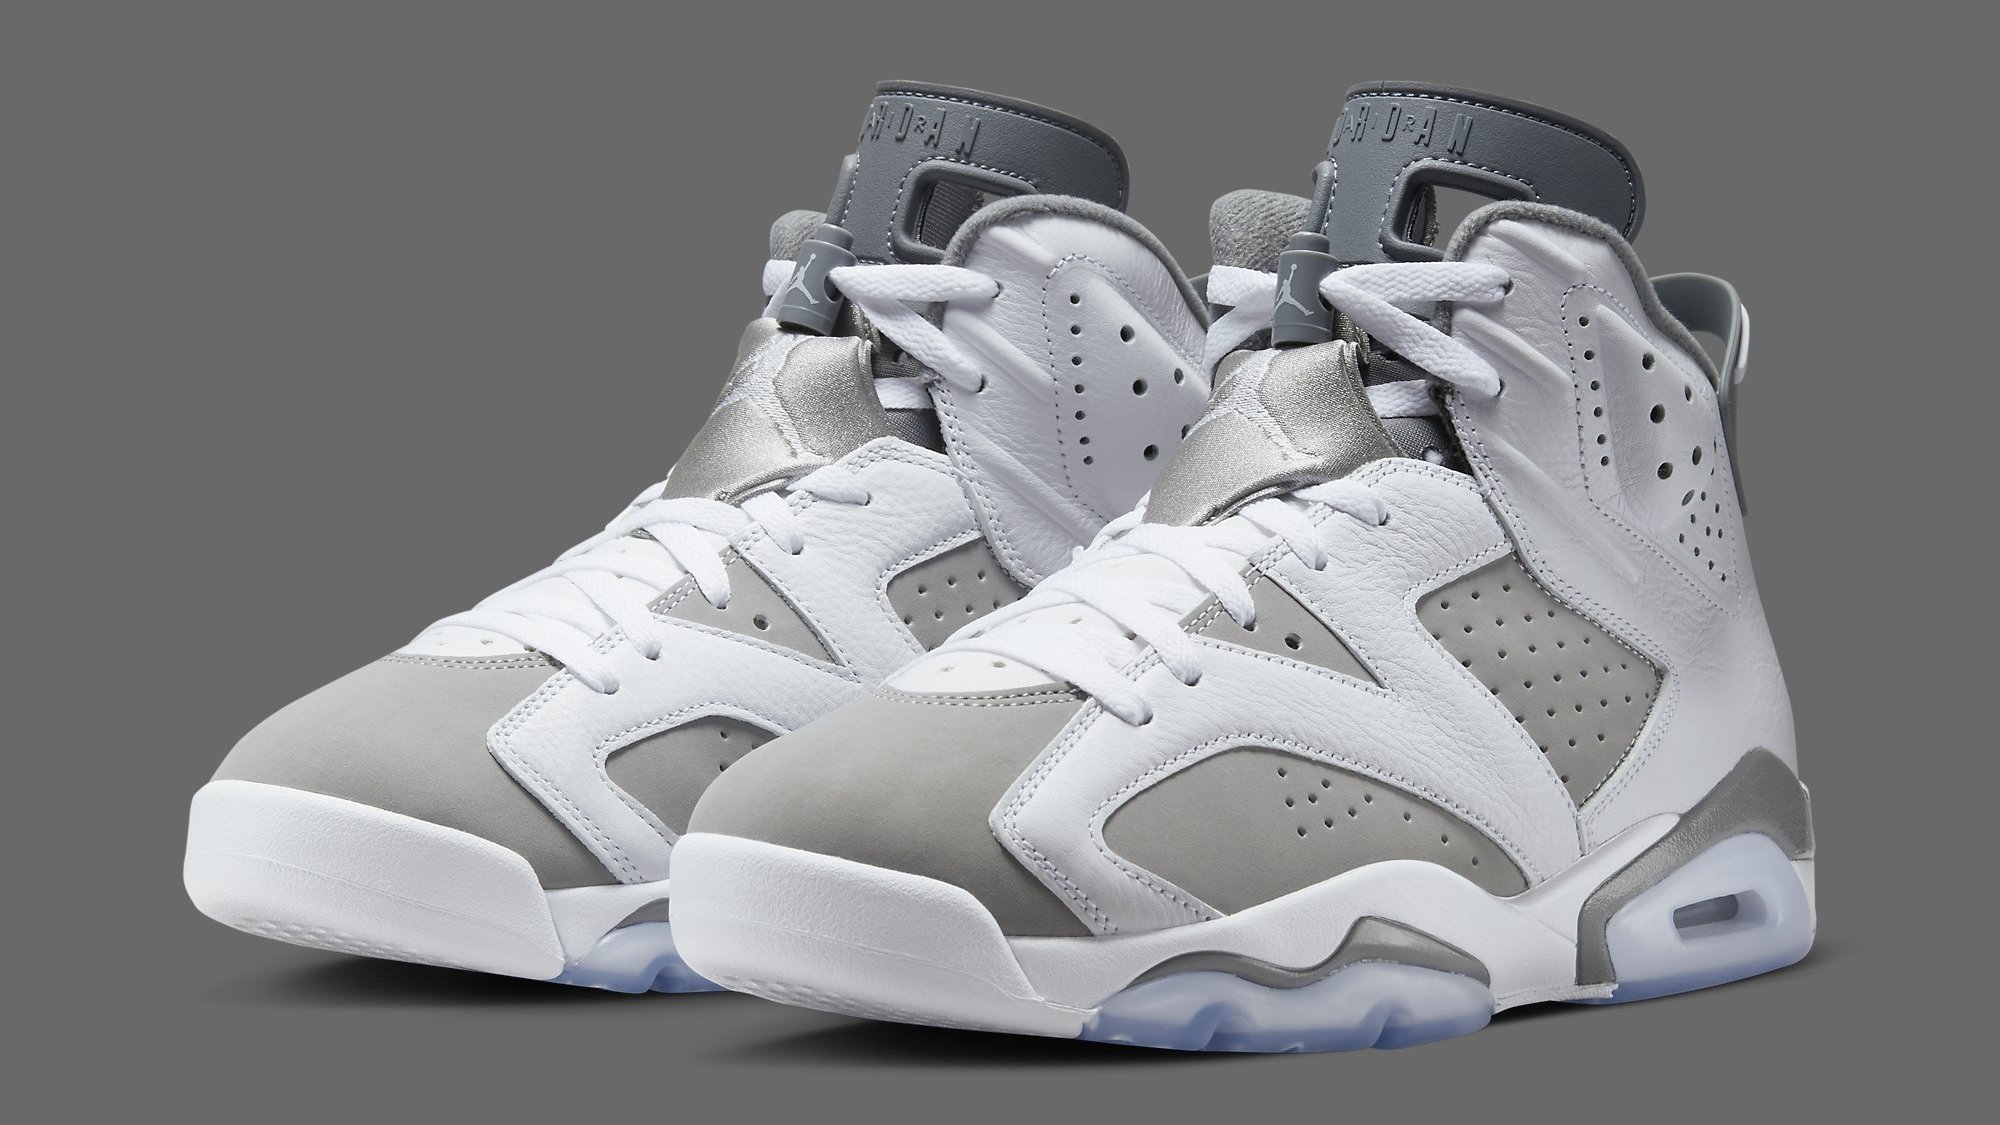 gray jordans that just came out